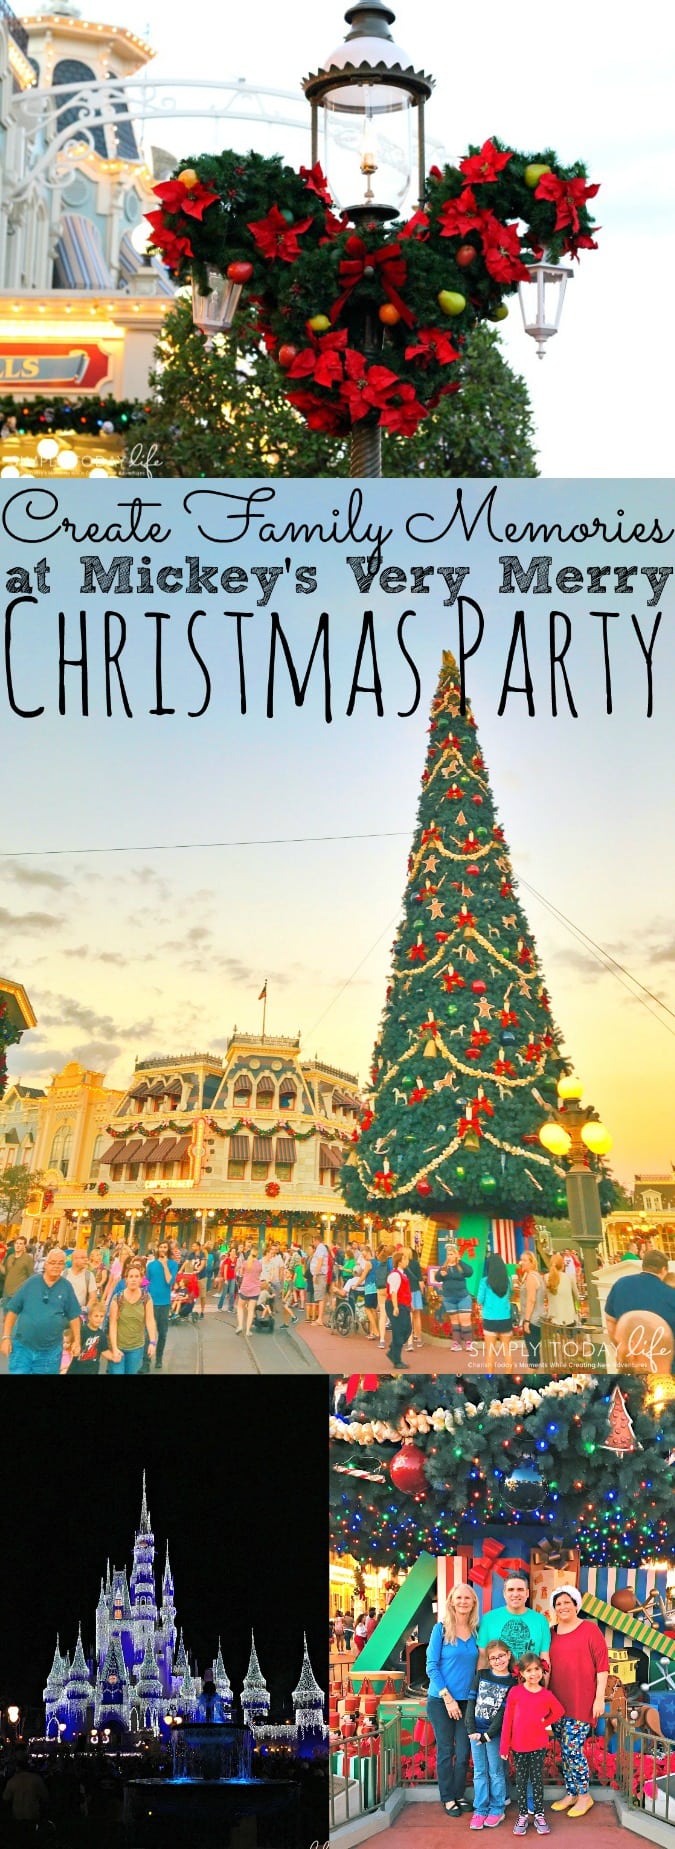 Create Family Memories at Mickey's Very Merry Christmas Party #VerryMerry - simplytodaylife.com